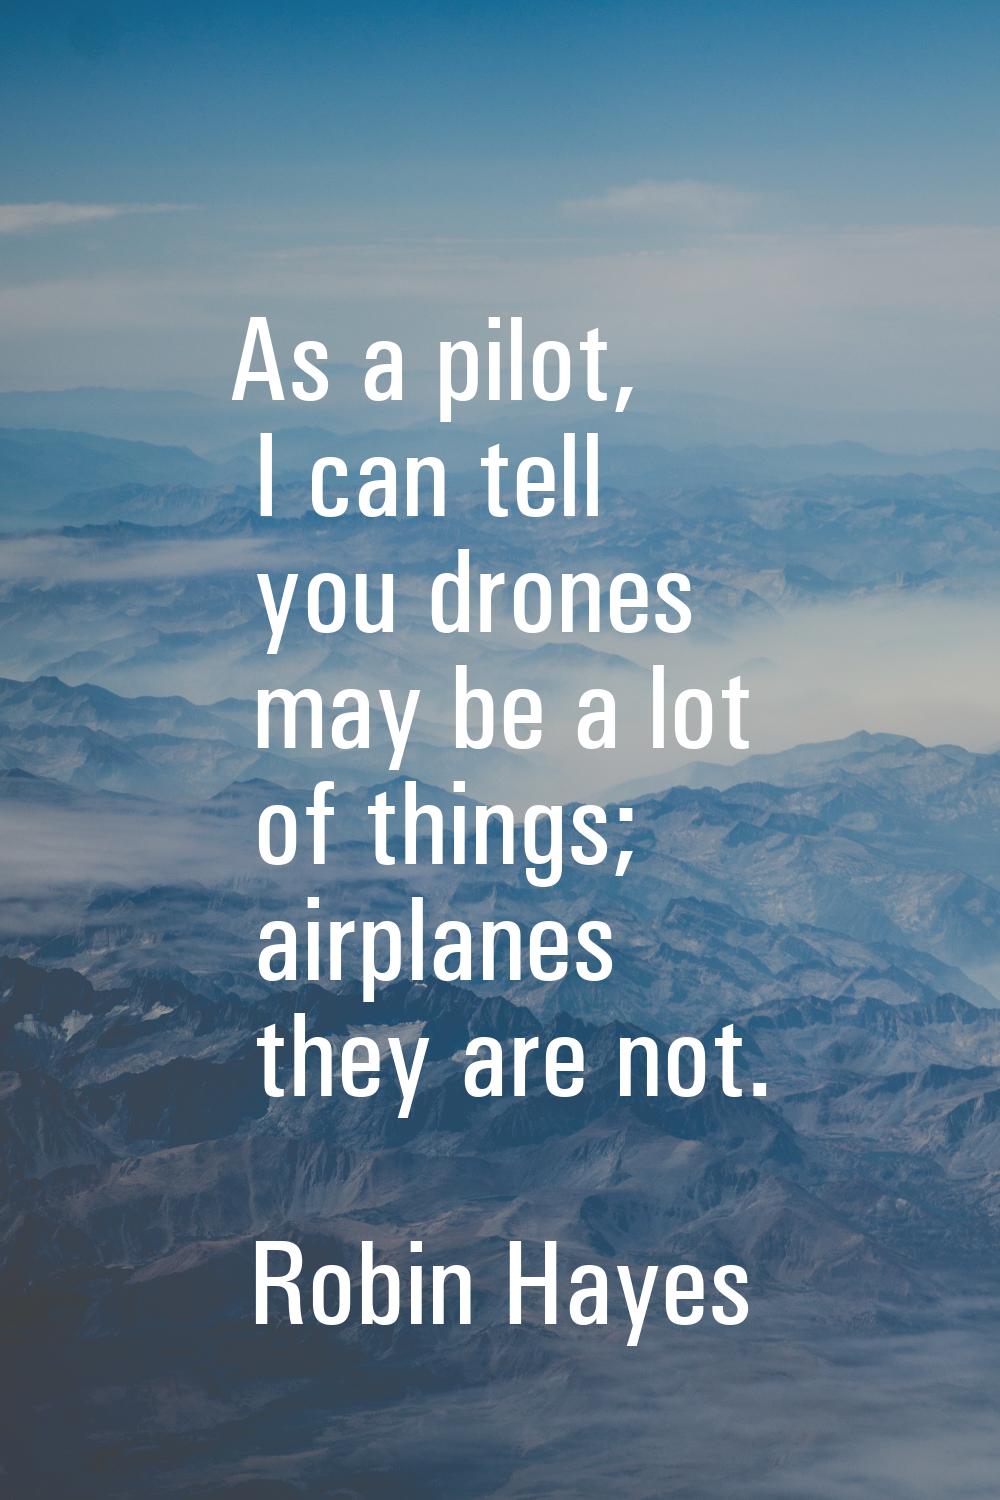 As a pilot, I can tell you drones may be a lot of things; airplanes they are not.